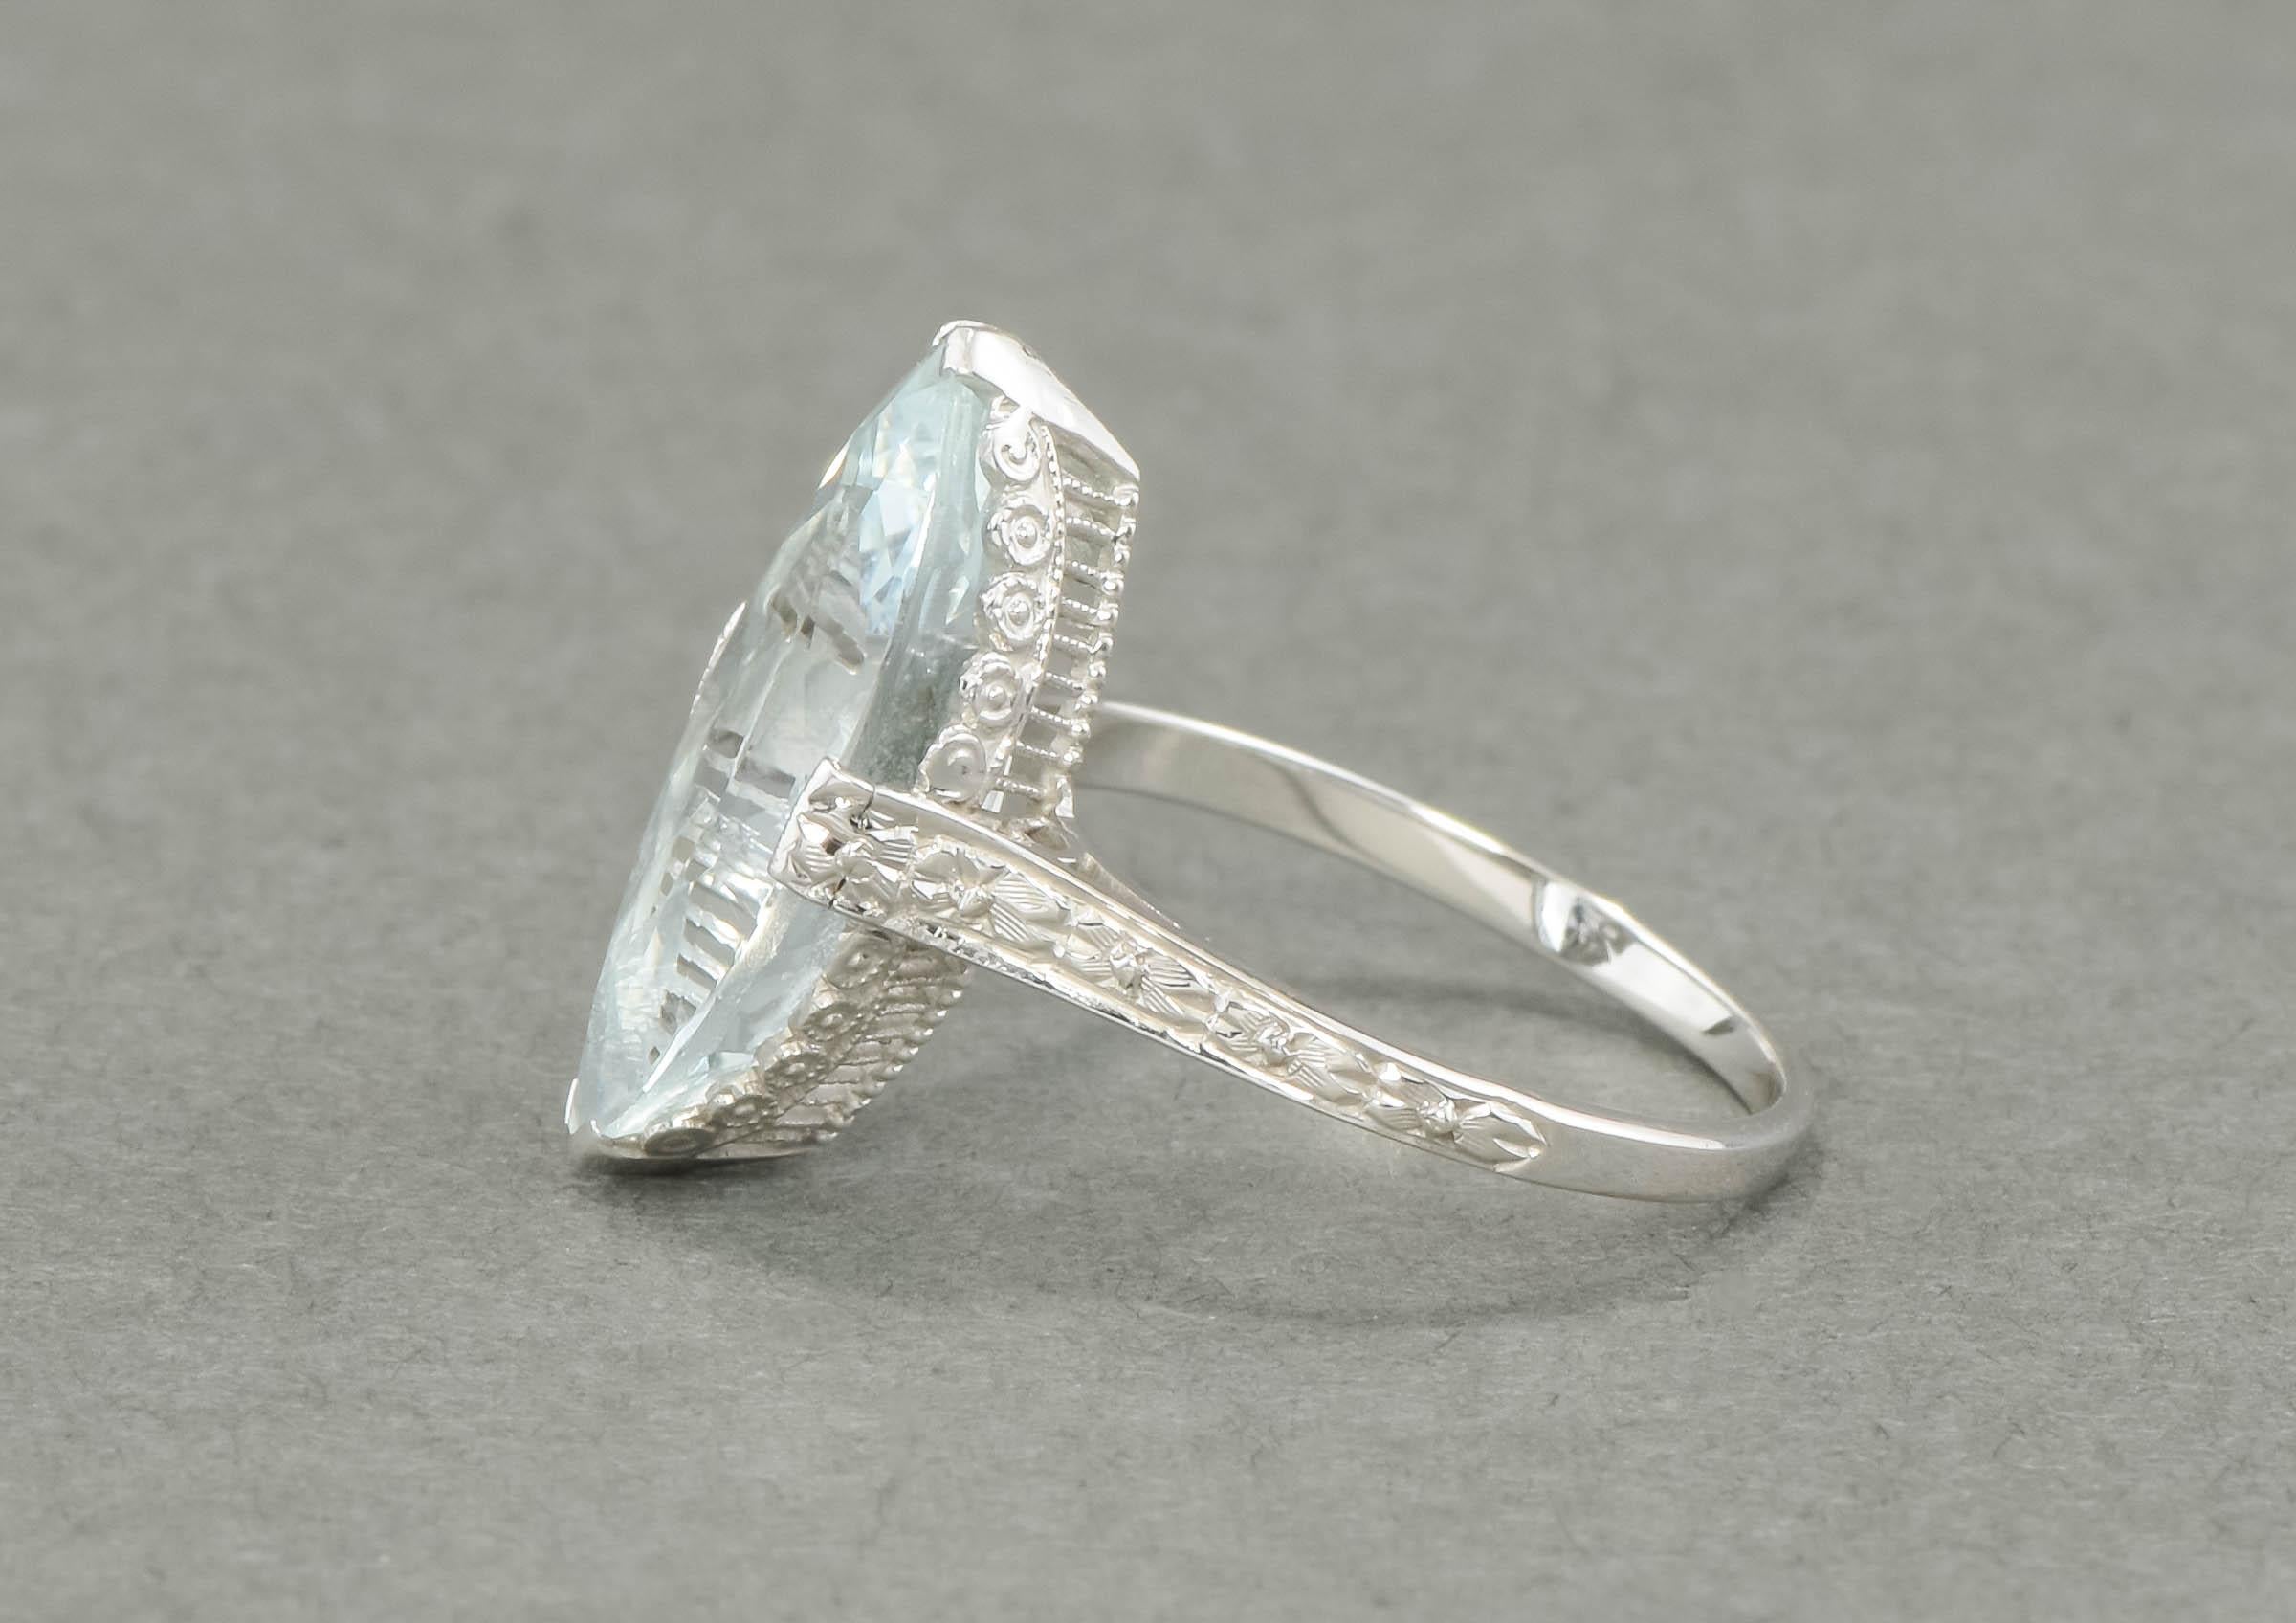 Vintage Aquamarine Ring in 18K White Gold with Filigree, approx 2.19 carats In Good Condition For Sale In Danvers, MA